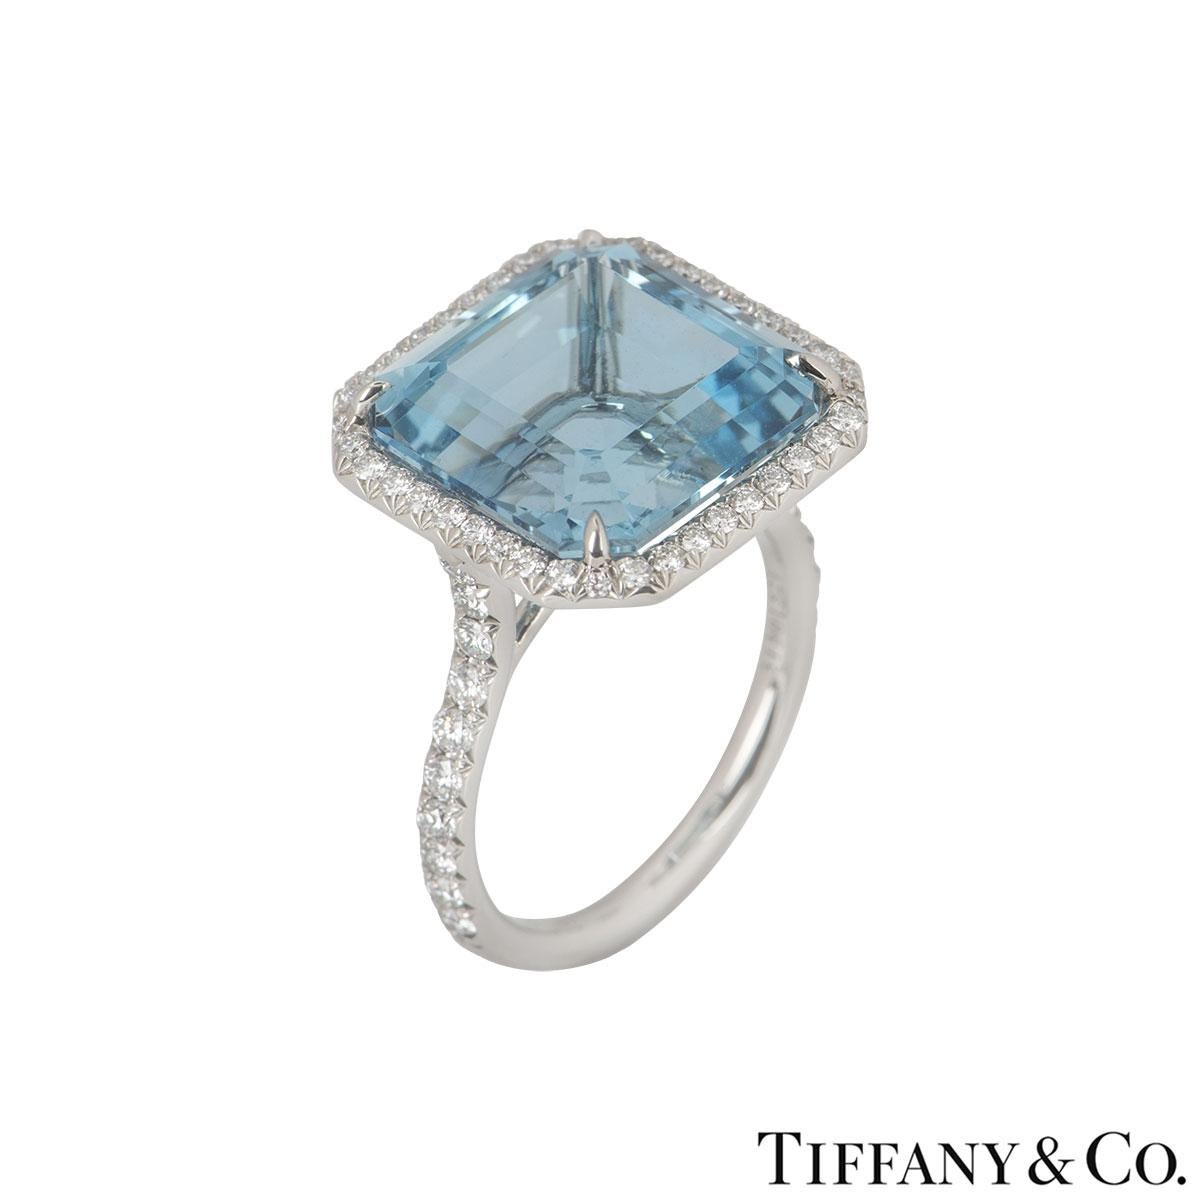 A beautiful platinum Tiffany & Co. aquamarine and diamond dress ring. The ring comprises of an ascher cut aquamarine in a 4 claw setting with a weight of approximately 8.34ct, with a light blue hue throughout. Complementing the gemstone is a halo of